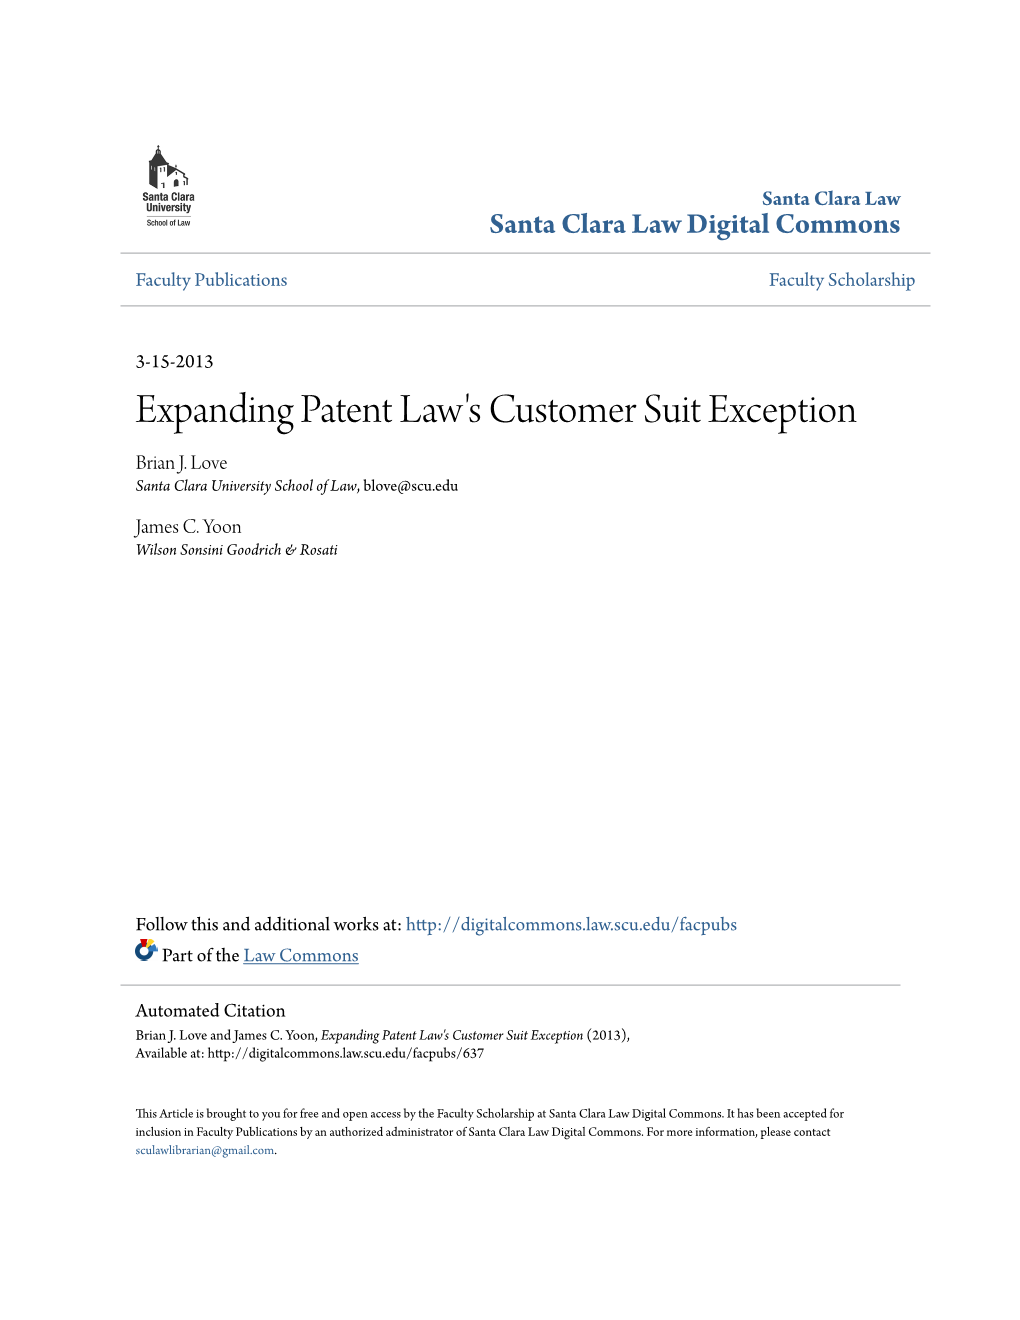 Expanding Patent Law's Customer Suit Exception Brian J